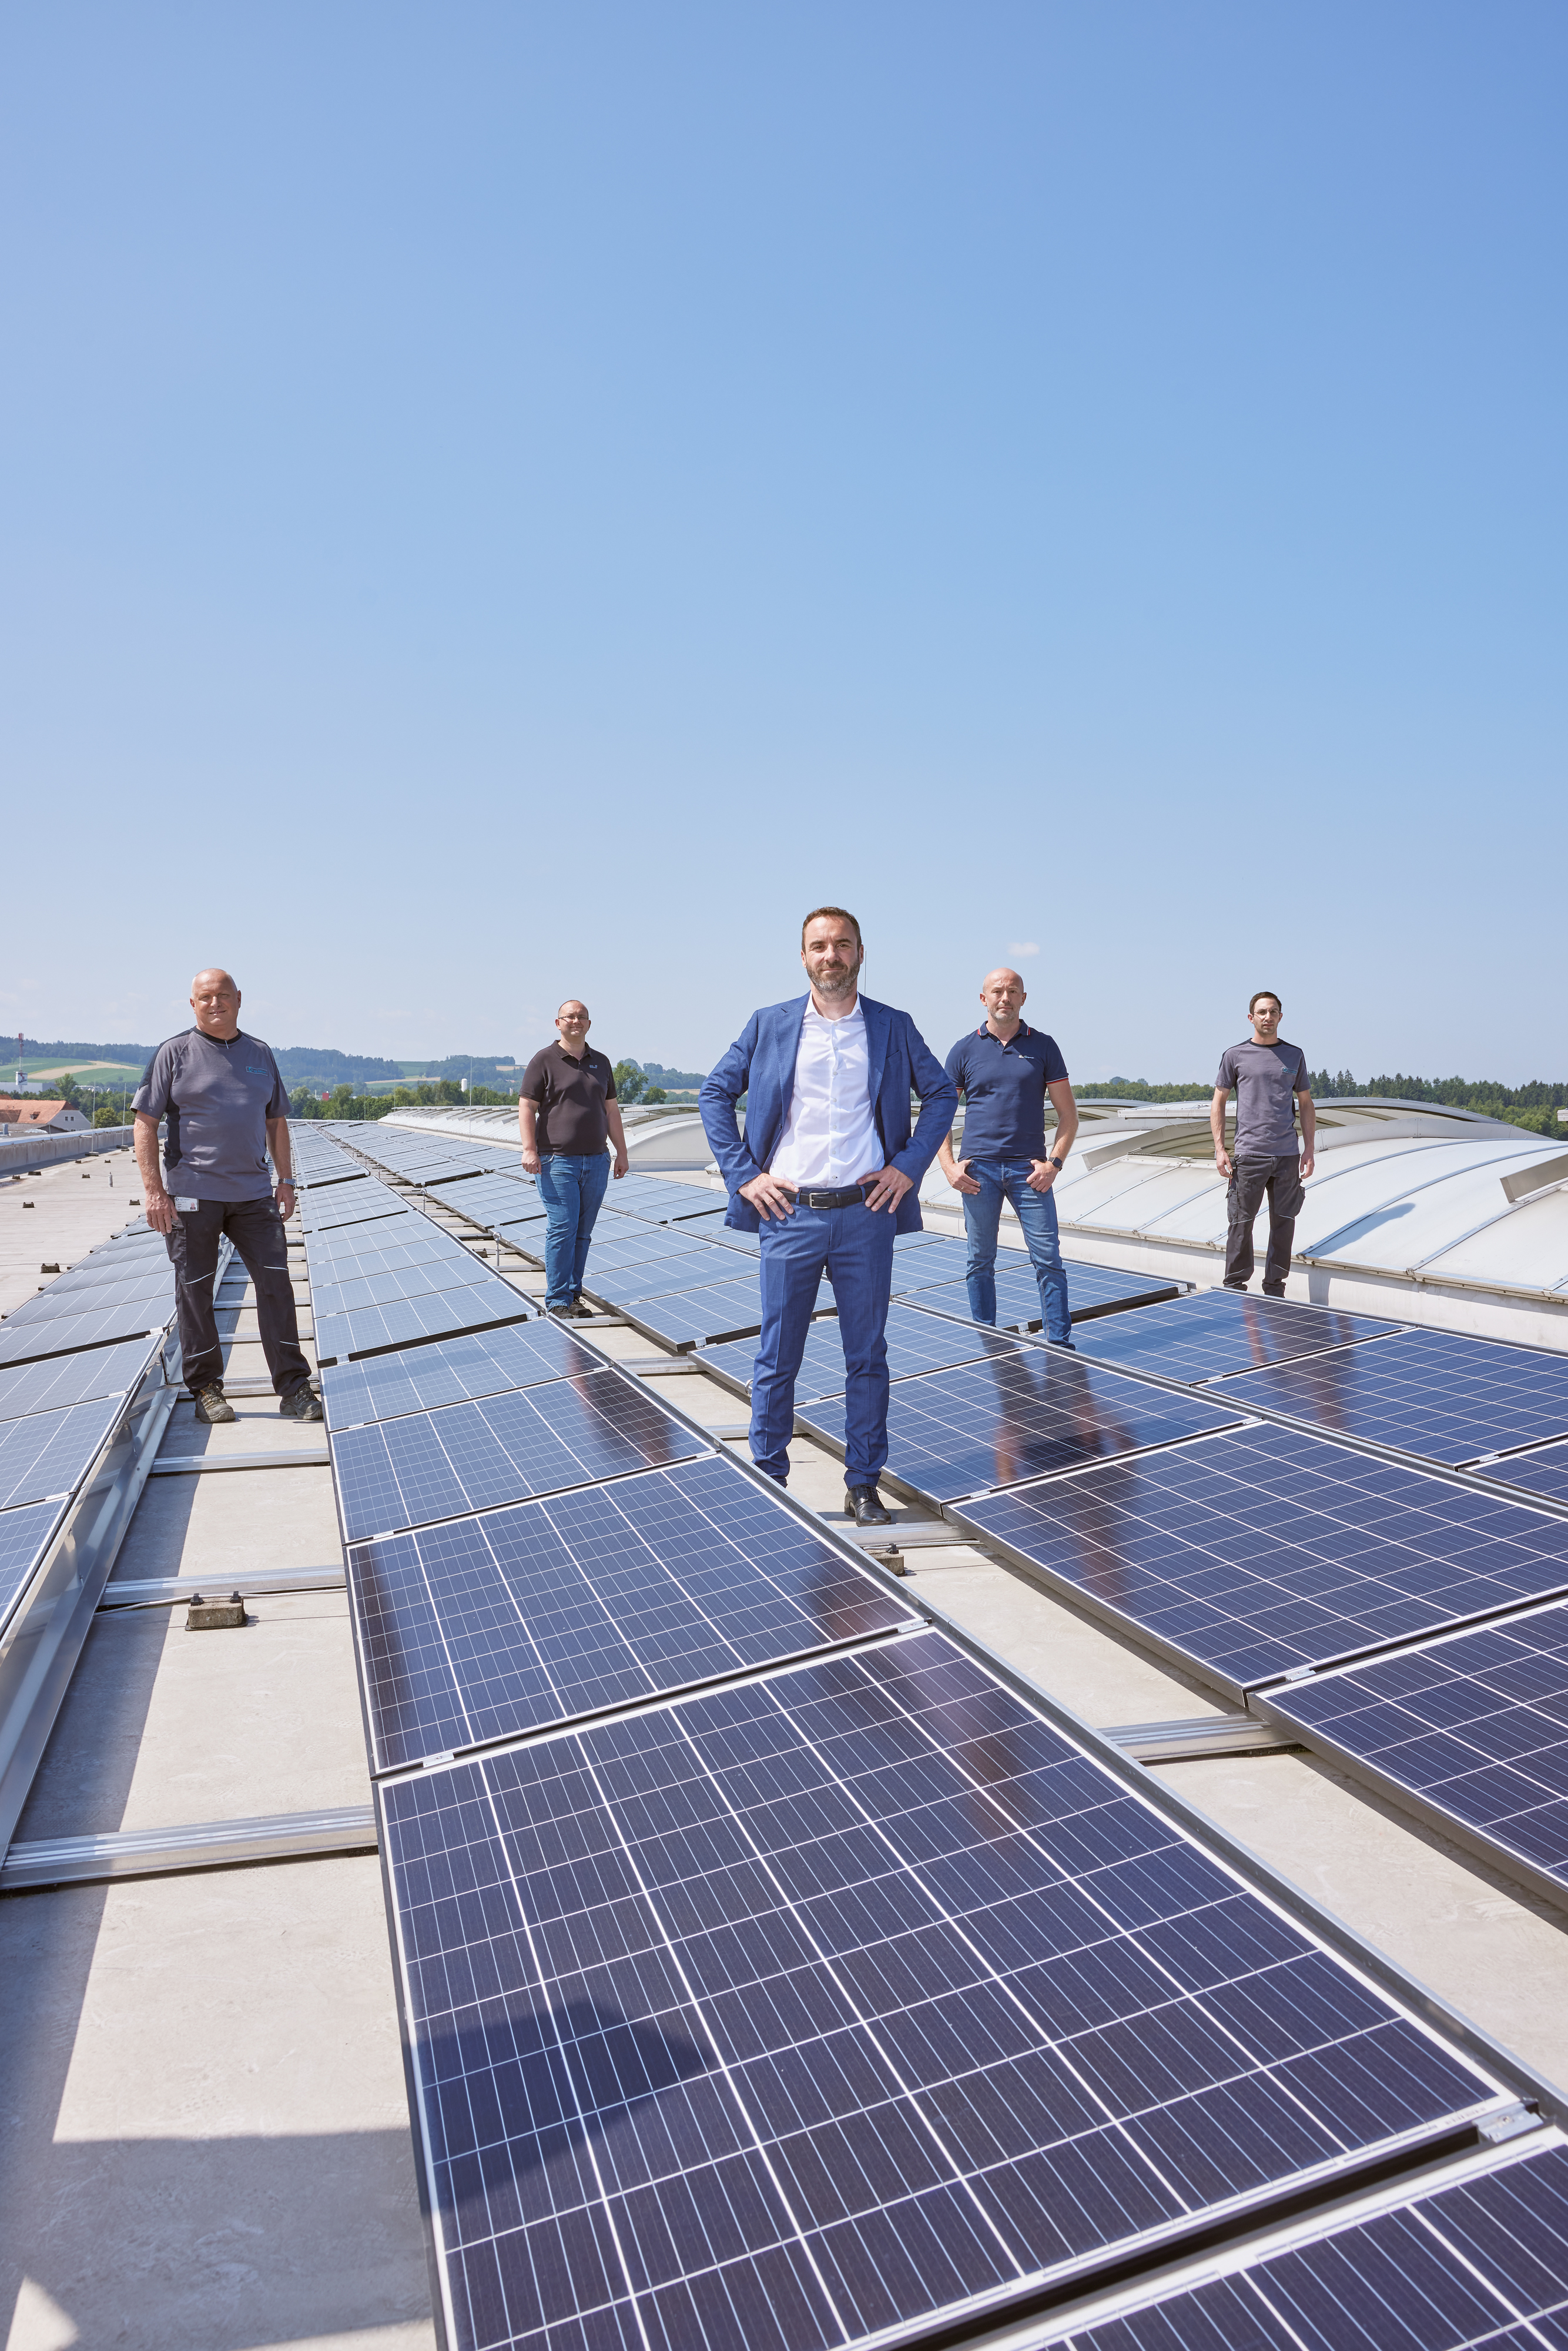 SGL Carbon has installed a photovoltaic (solar panel) system on the roof of its manufacturing plant in Ort im Innkreis, Austria.